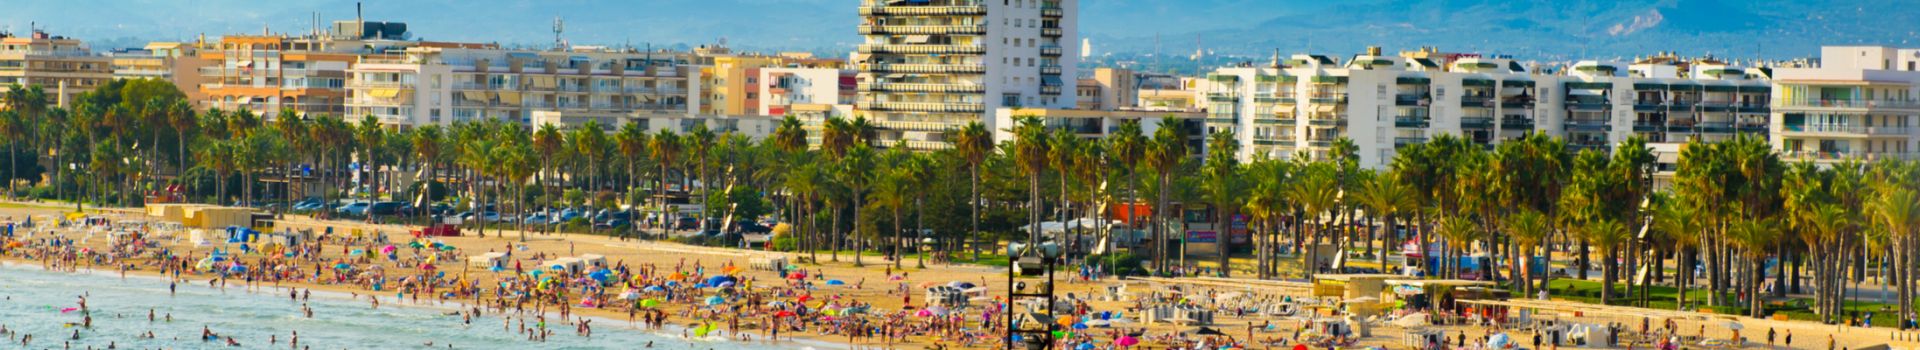 Family holidays to Salou with Cassidy Travel